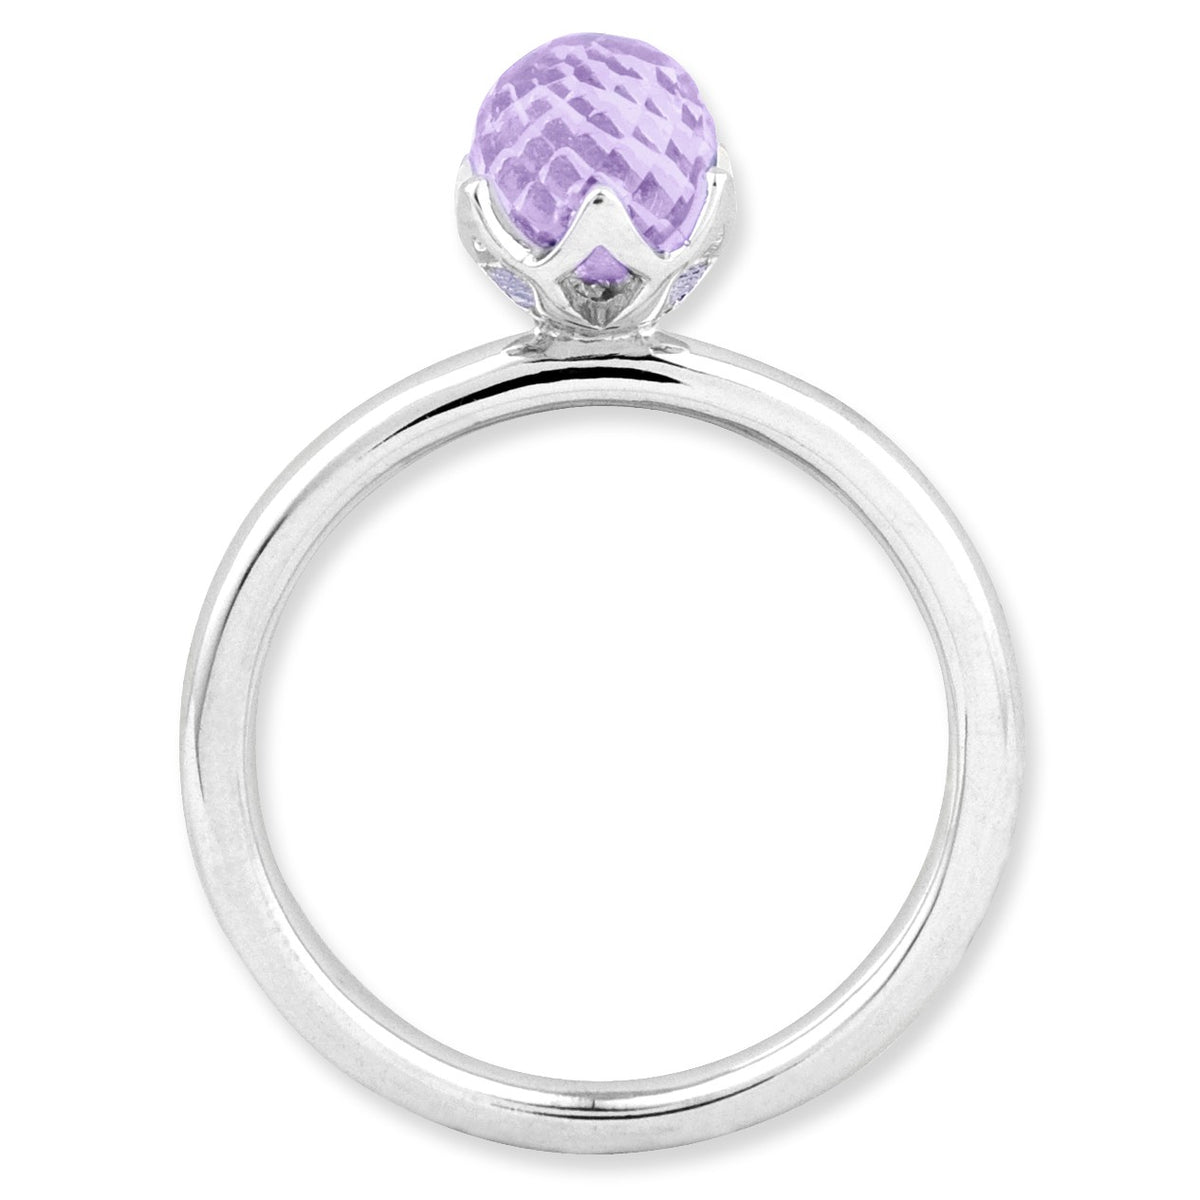 Alternate view of the Amethyst Briolette Rhodium Plated Sterling Silver Stackable Ring by The Black Bow Jewelry Co.